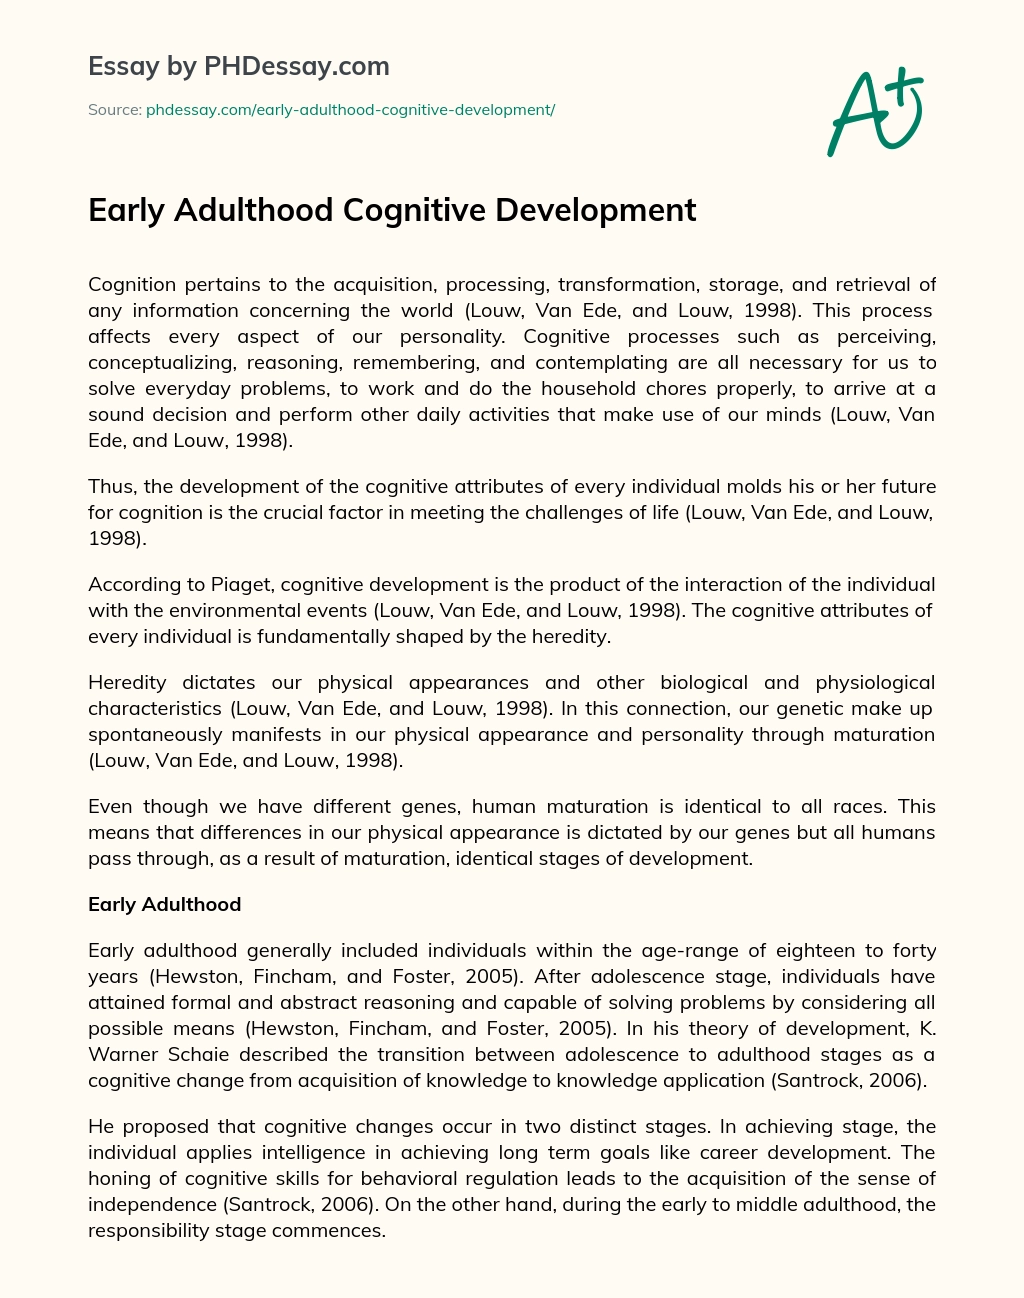 Early Adulthood Cognitive Development essay